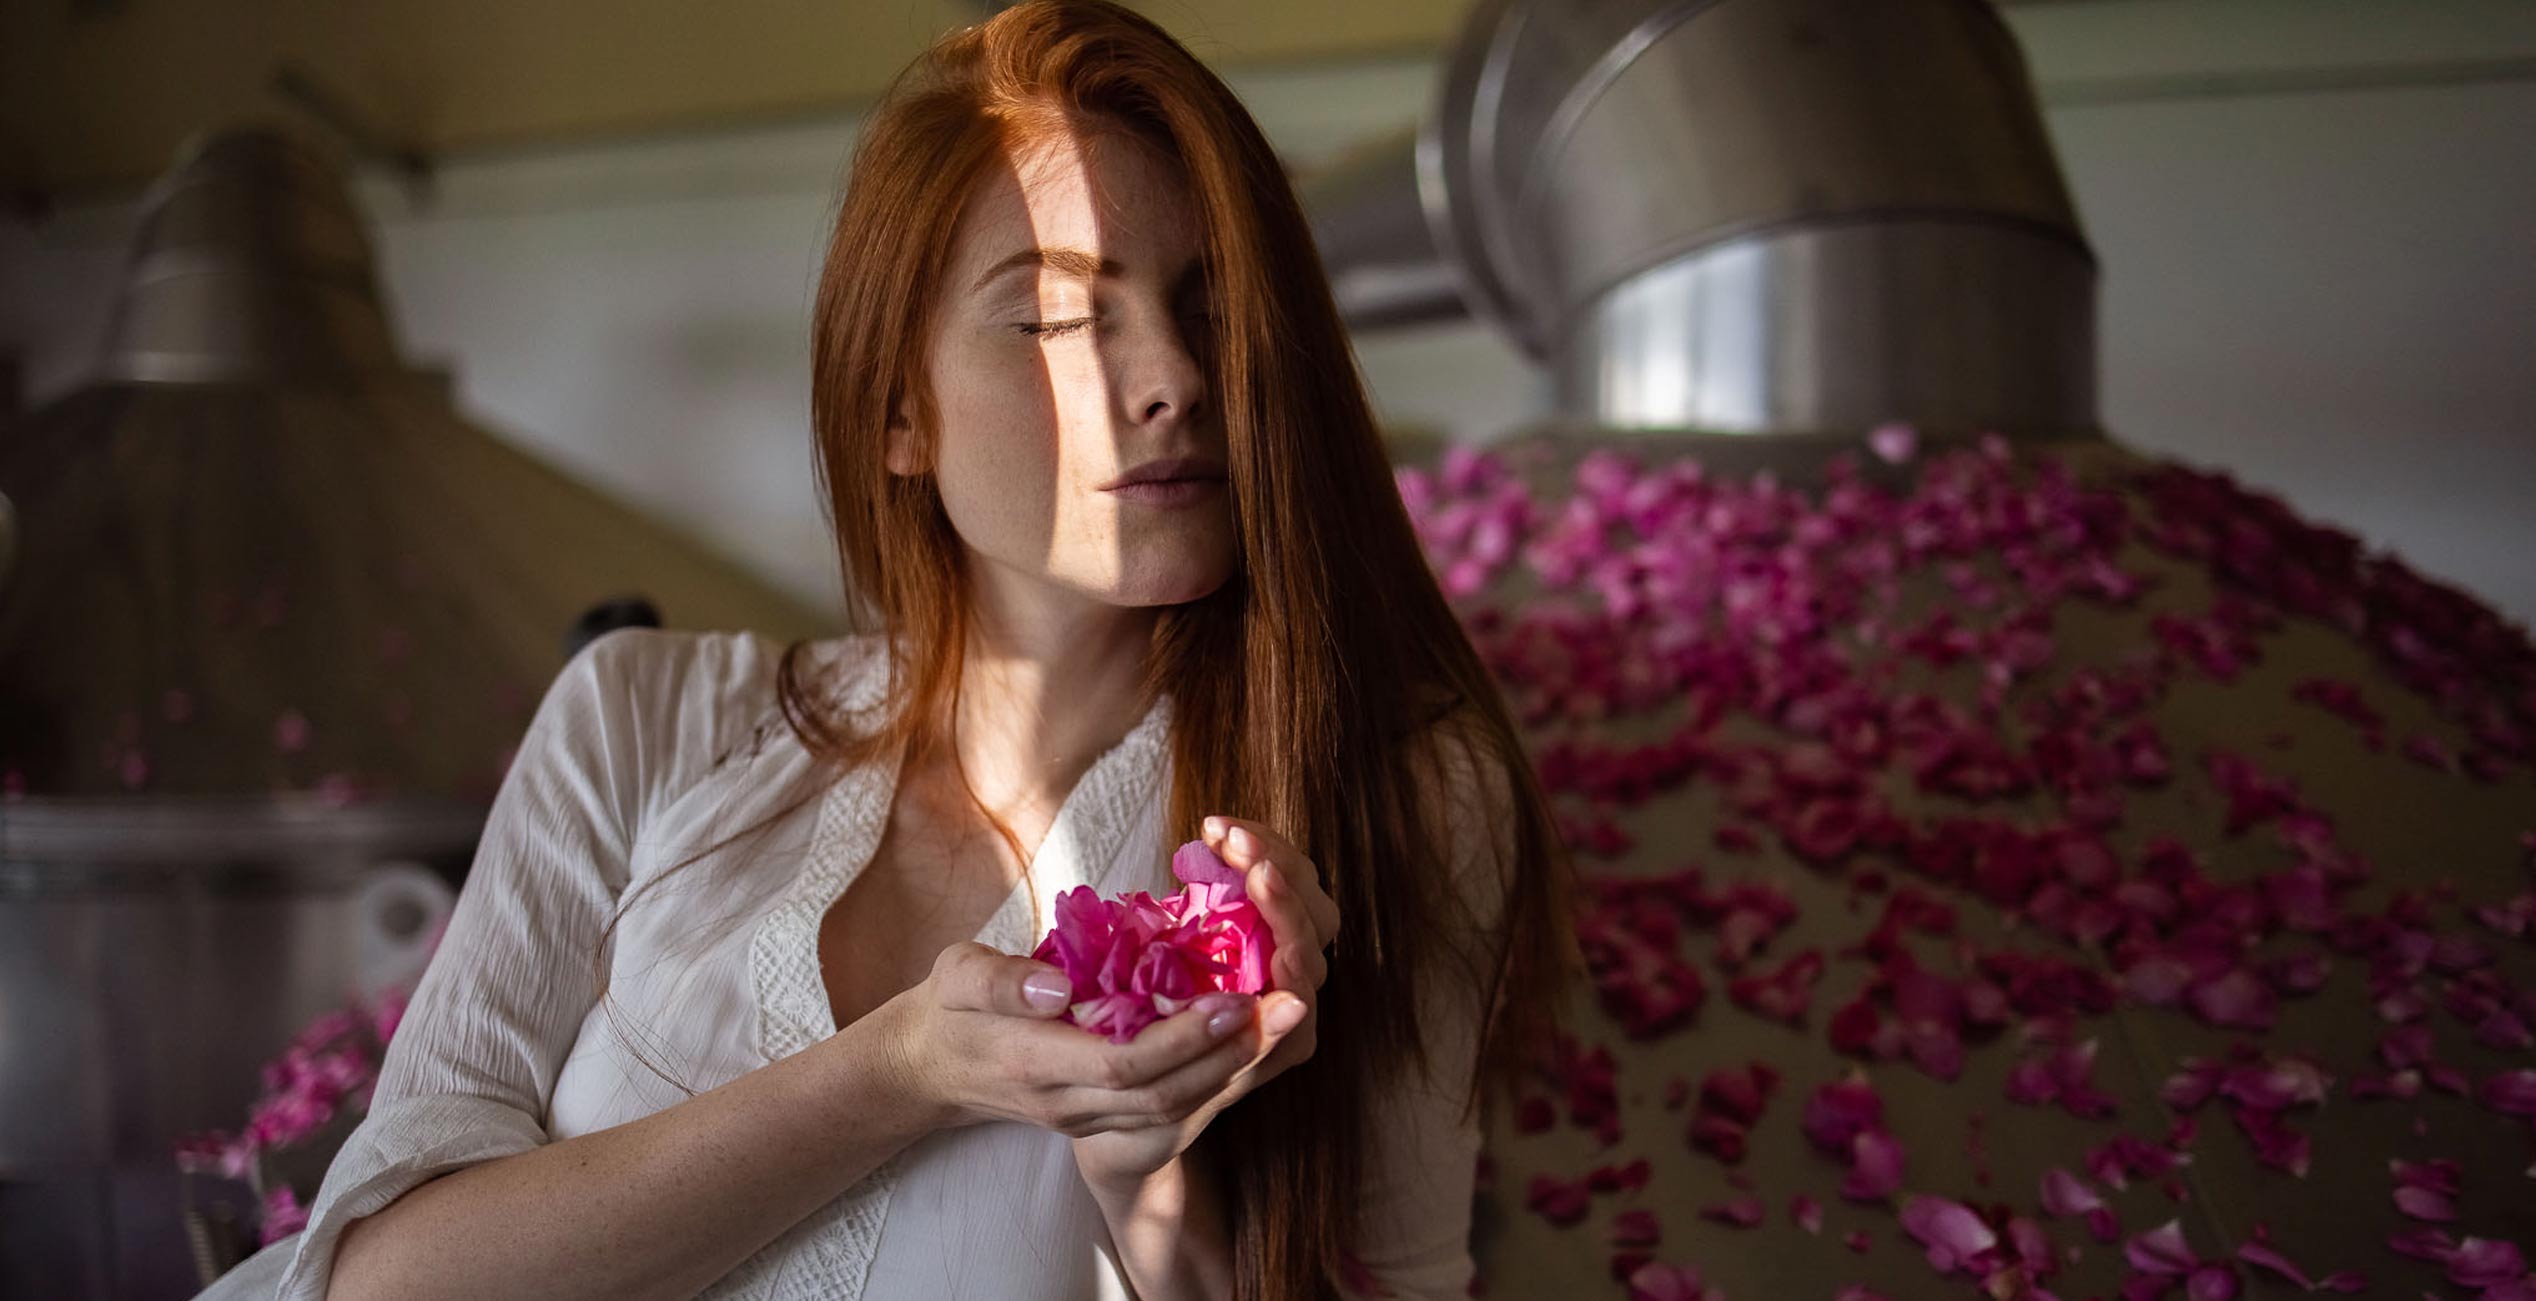 A woman is smelling rose petals in a brewery.